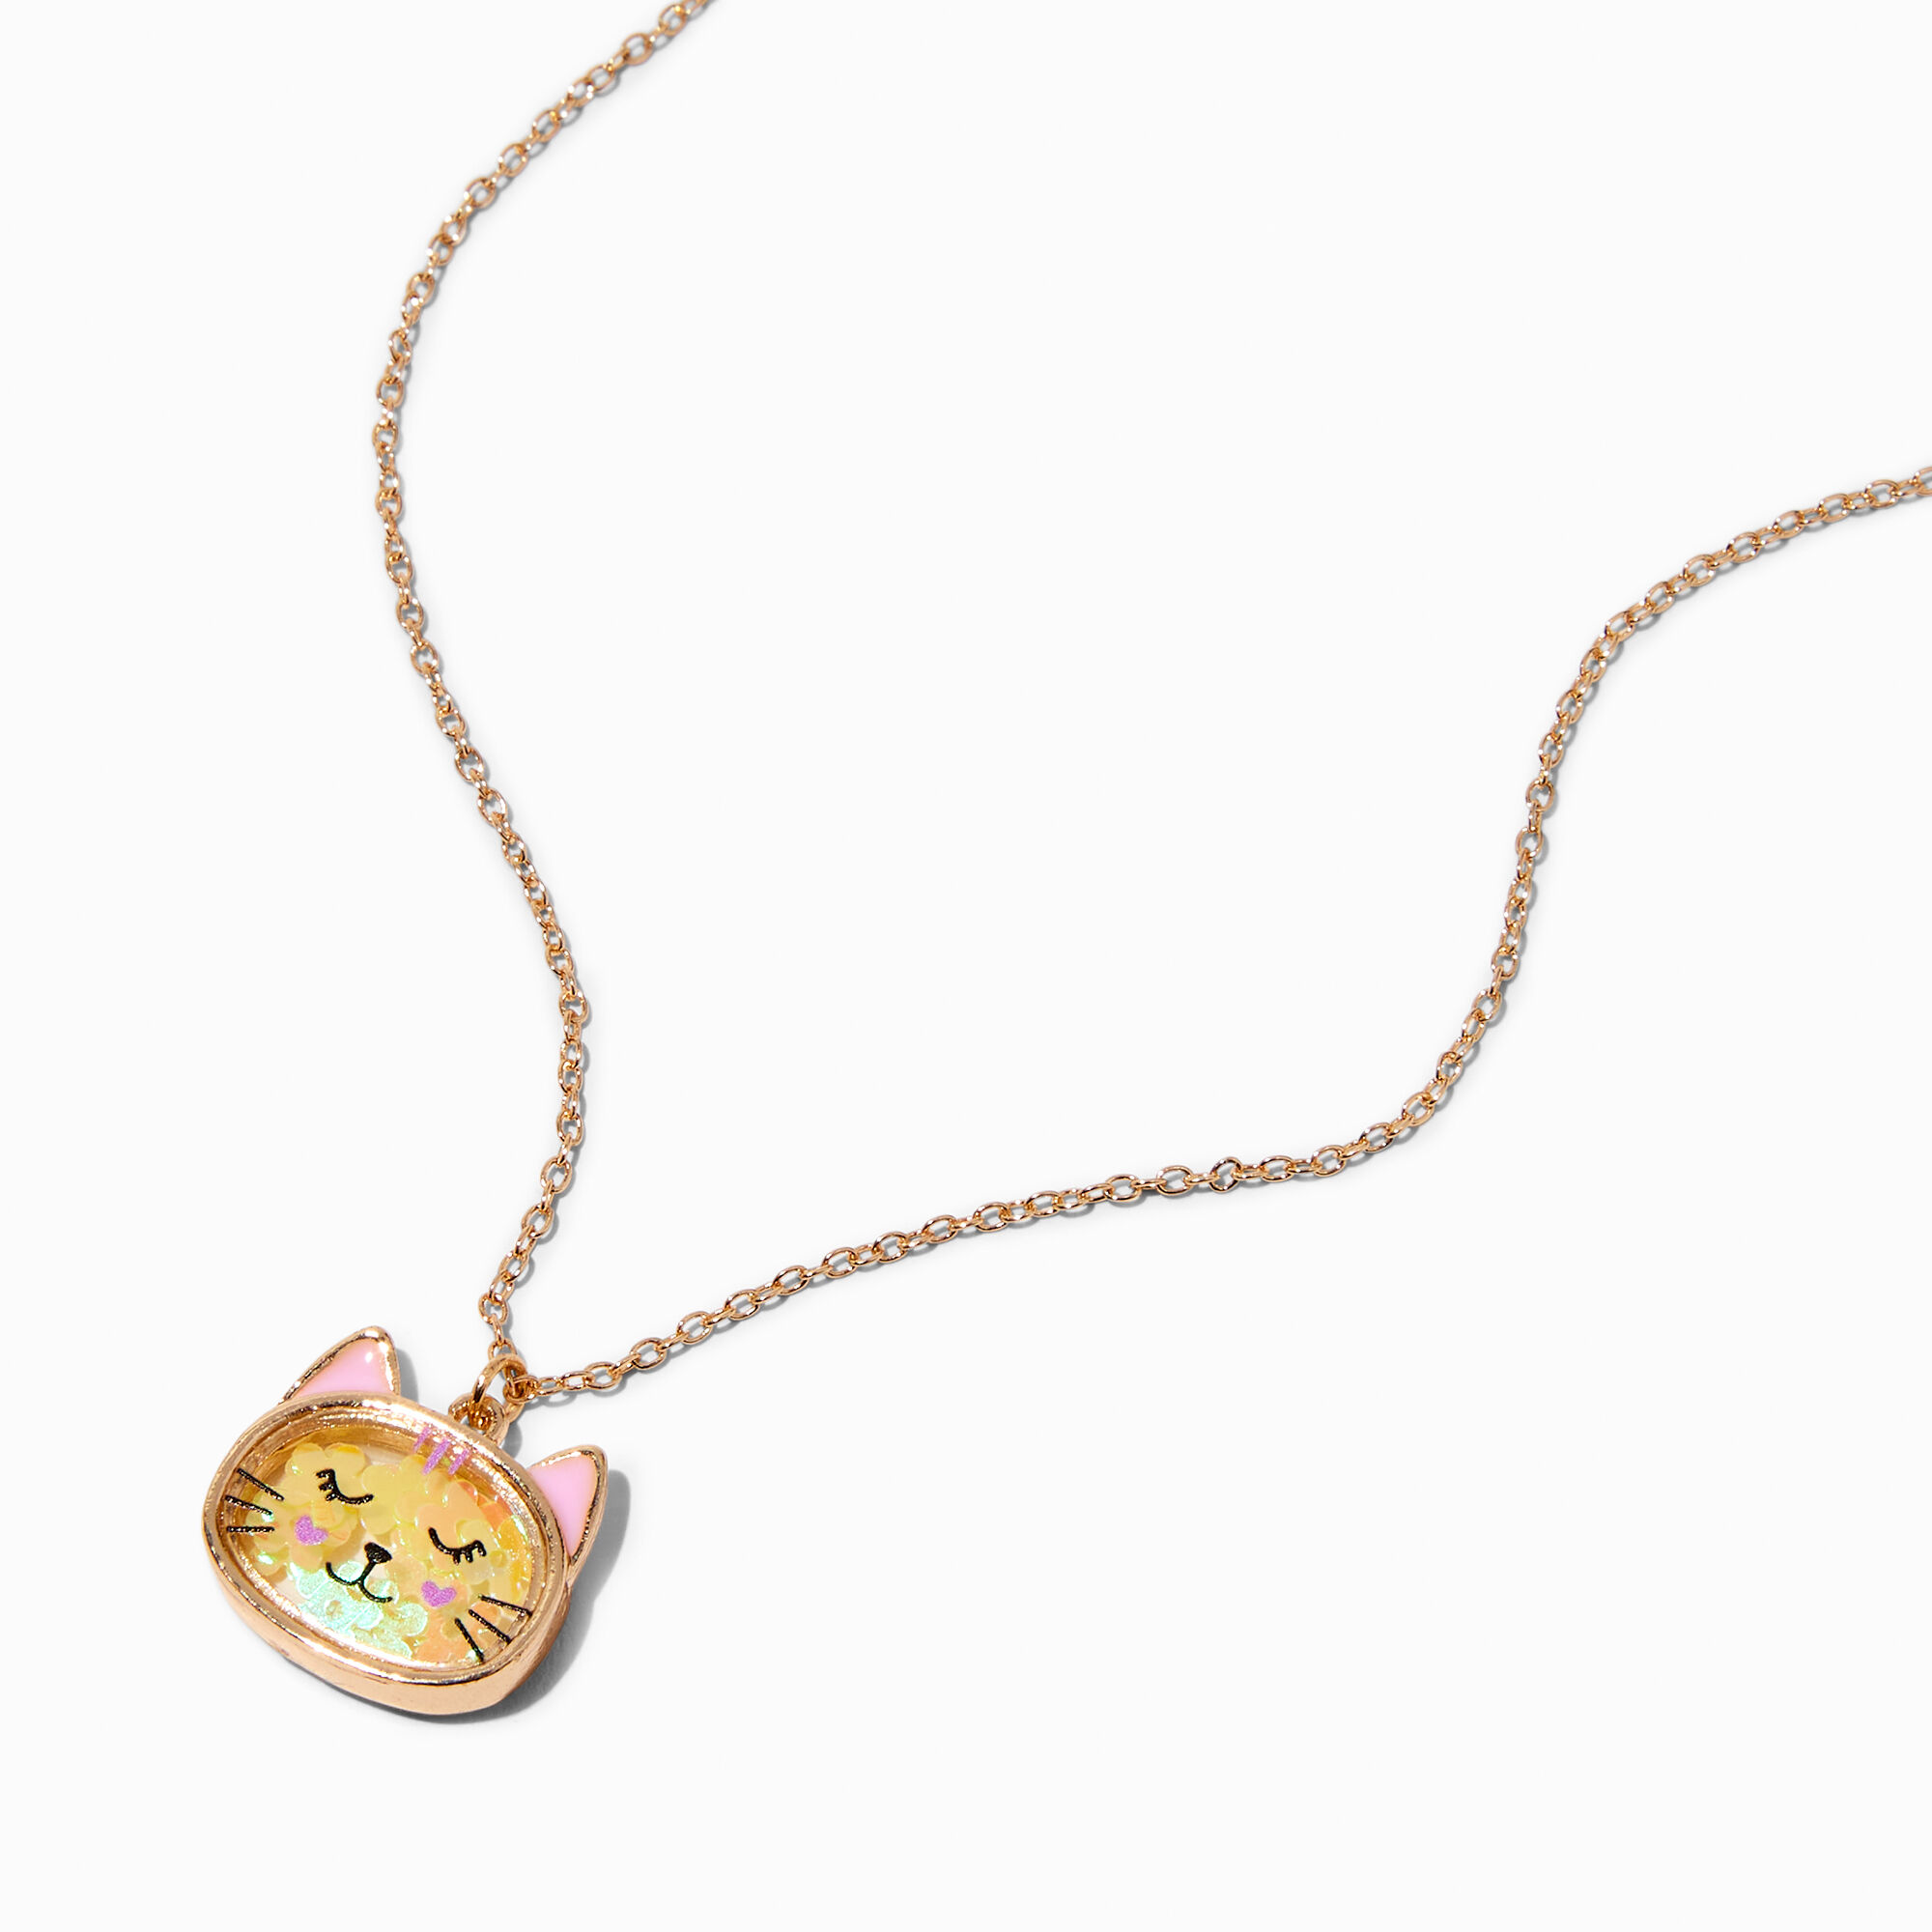 View Claires Tone Cat Shaker Pendant Necklace Gold information